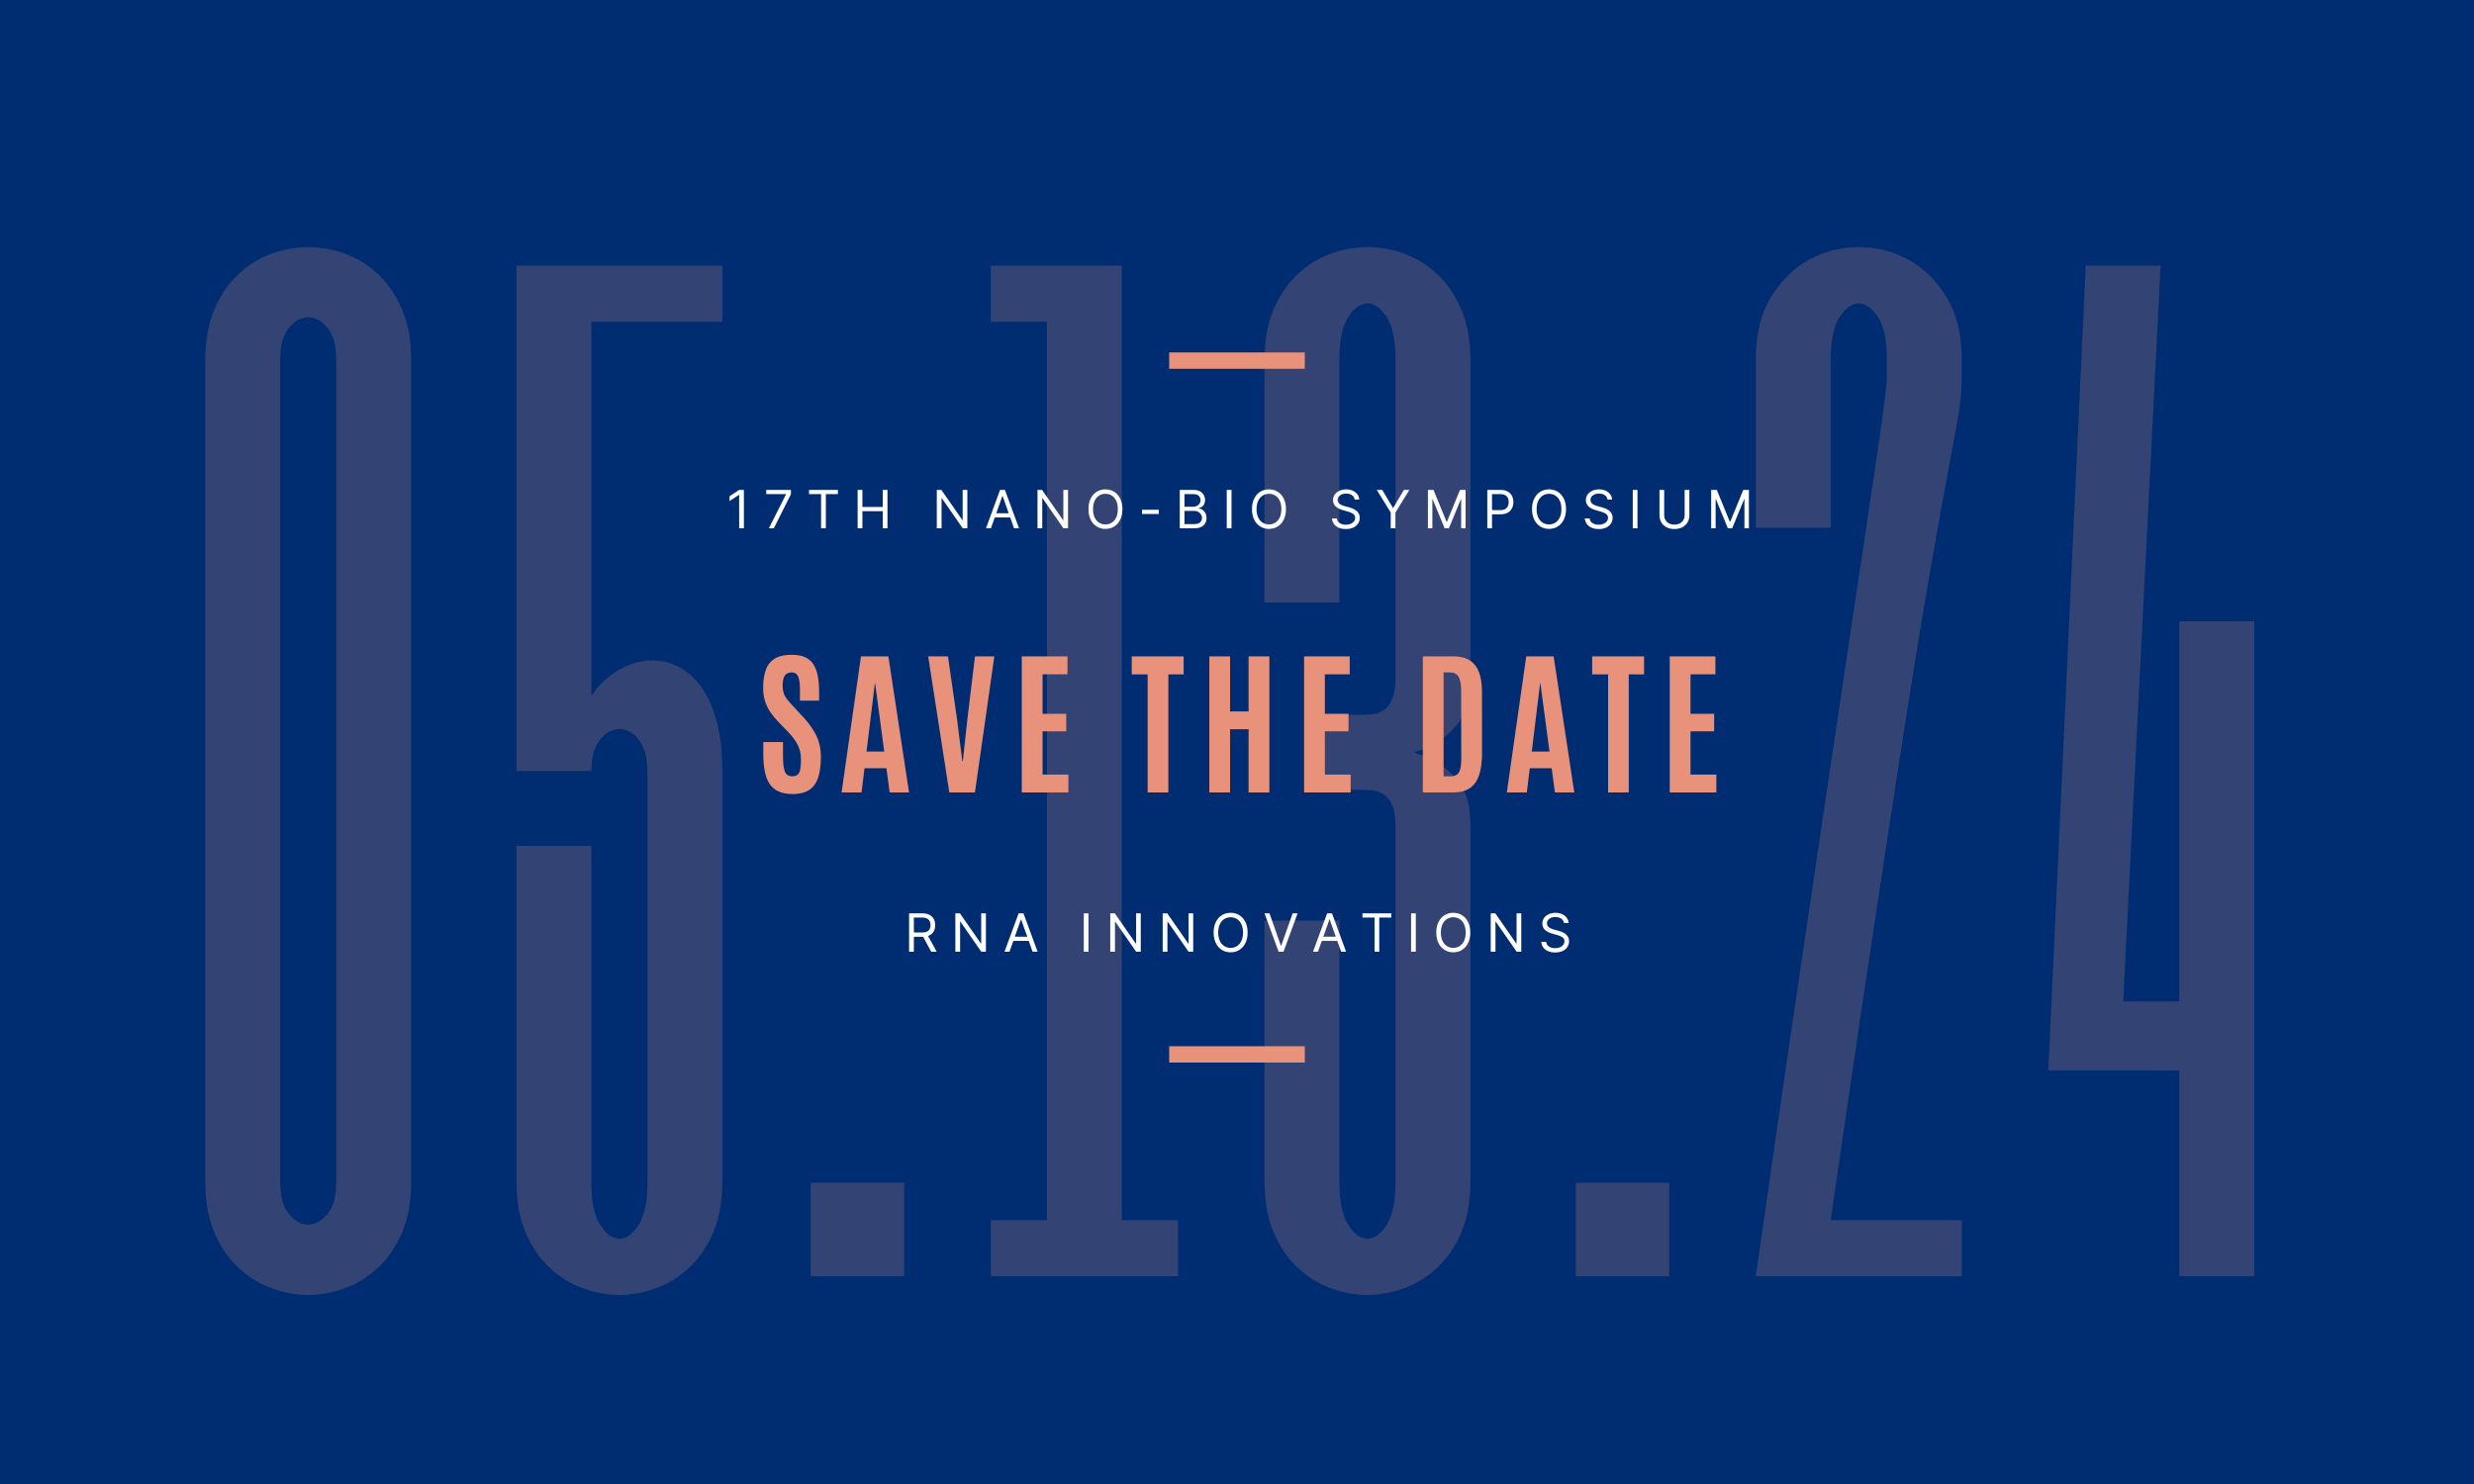 Dark blue backgound with transparent text that reads the date 05.13.24. In the foreground is white and peach text that reads 17th Nano-Bio Symposium, Save the Date, and RNA Innovations.